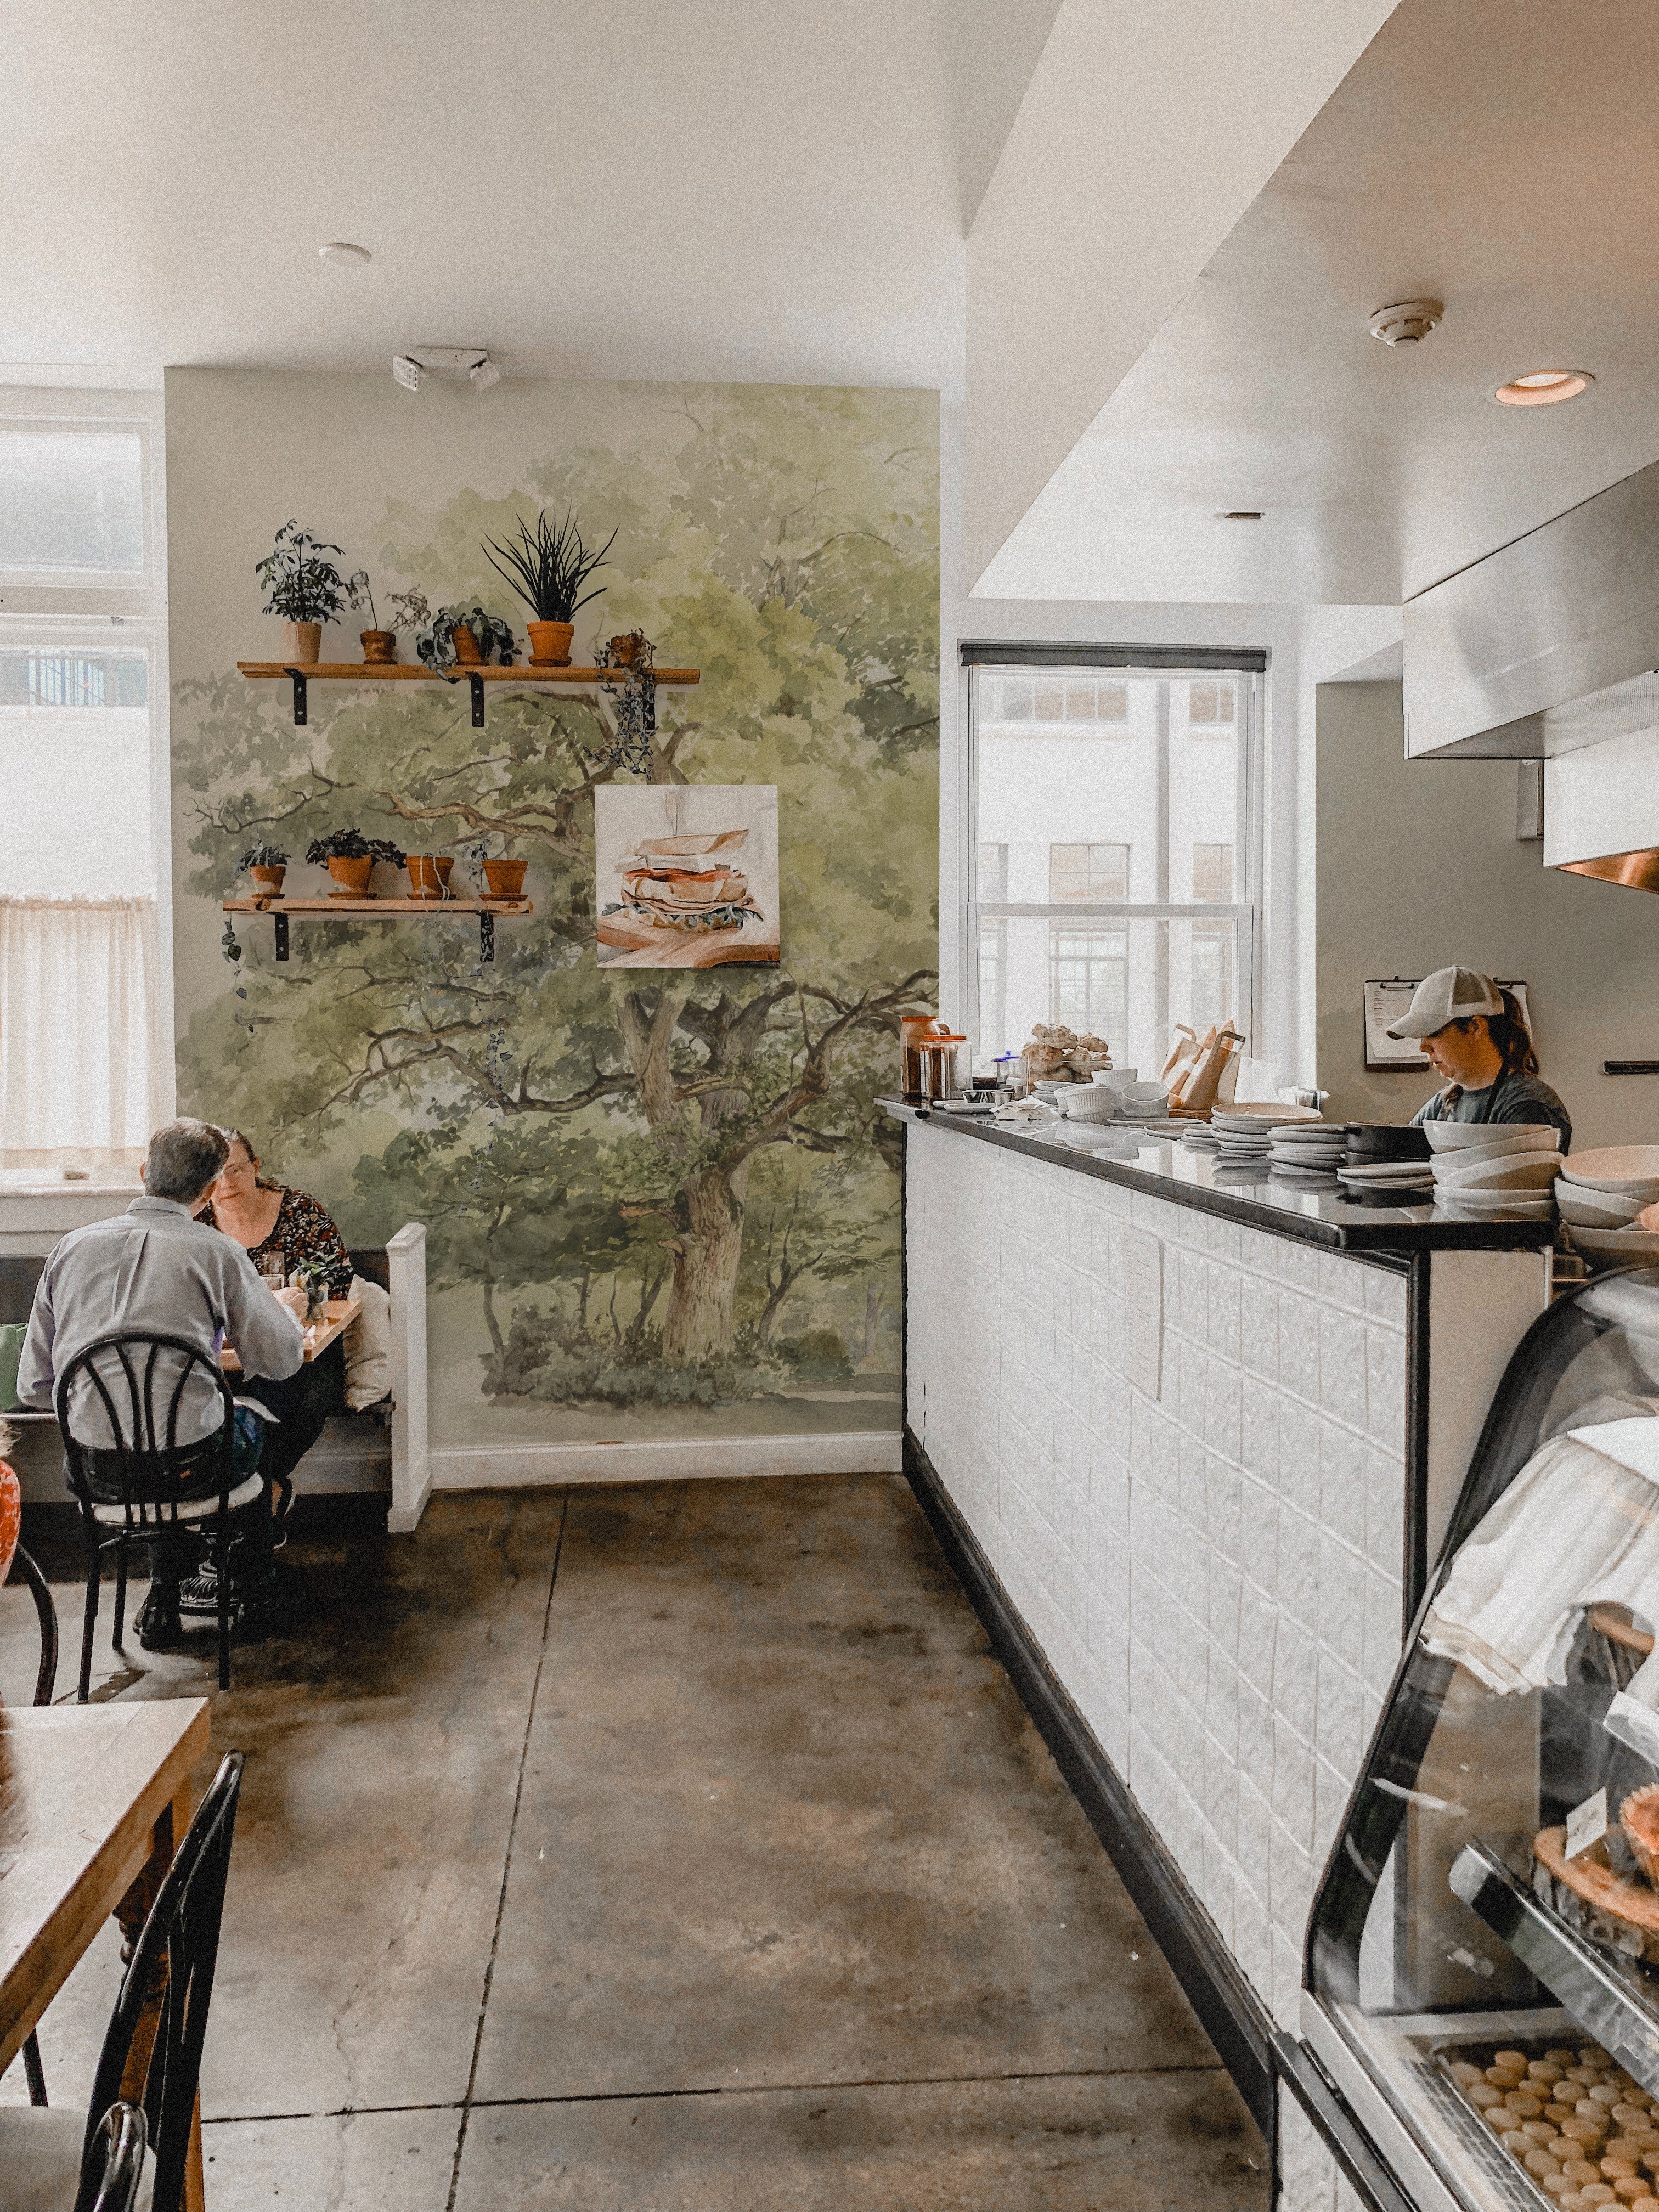 A cozy café interior where the Boomstudie Vintage Wall Mural serves as a backdrop, adding a rustic charm with its detailed depiction of a grand old tree. The mural provides a calming natural element to the space, harmonizing with wooden shelving filled with plants and cafe amenities.